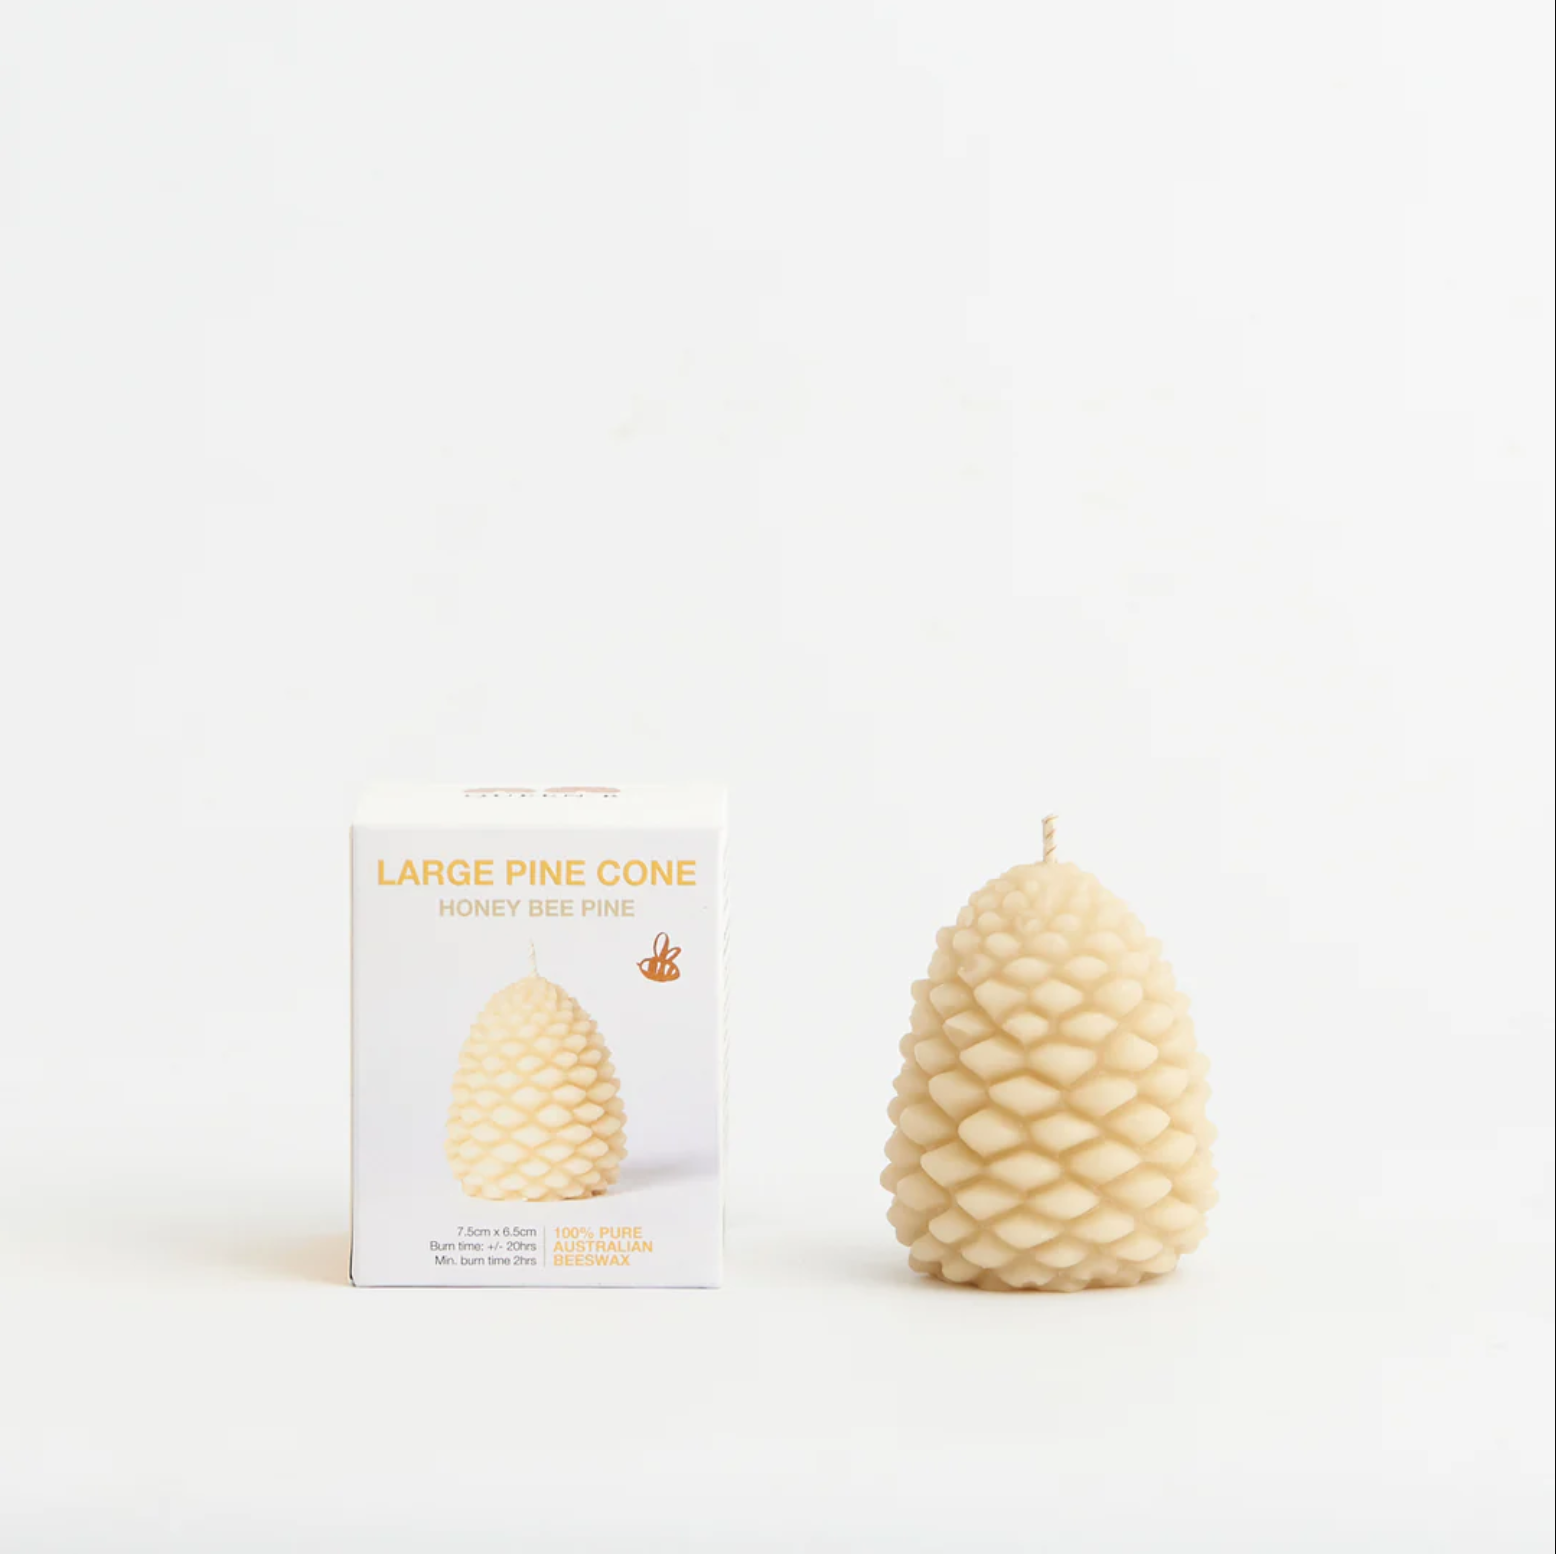 Queen B Beeswax Pinecone Candle - Large